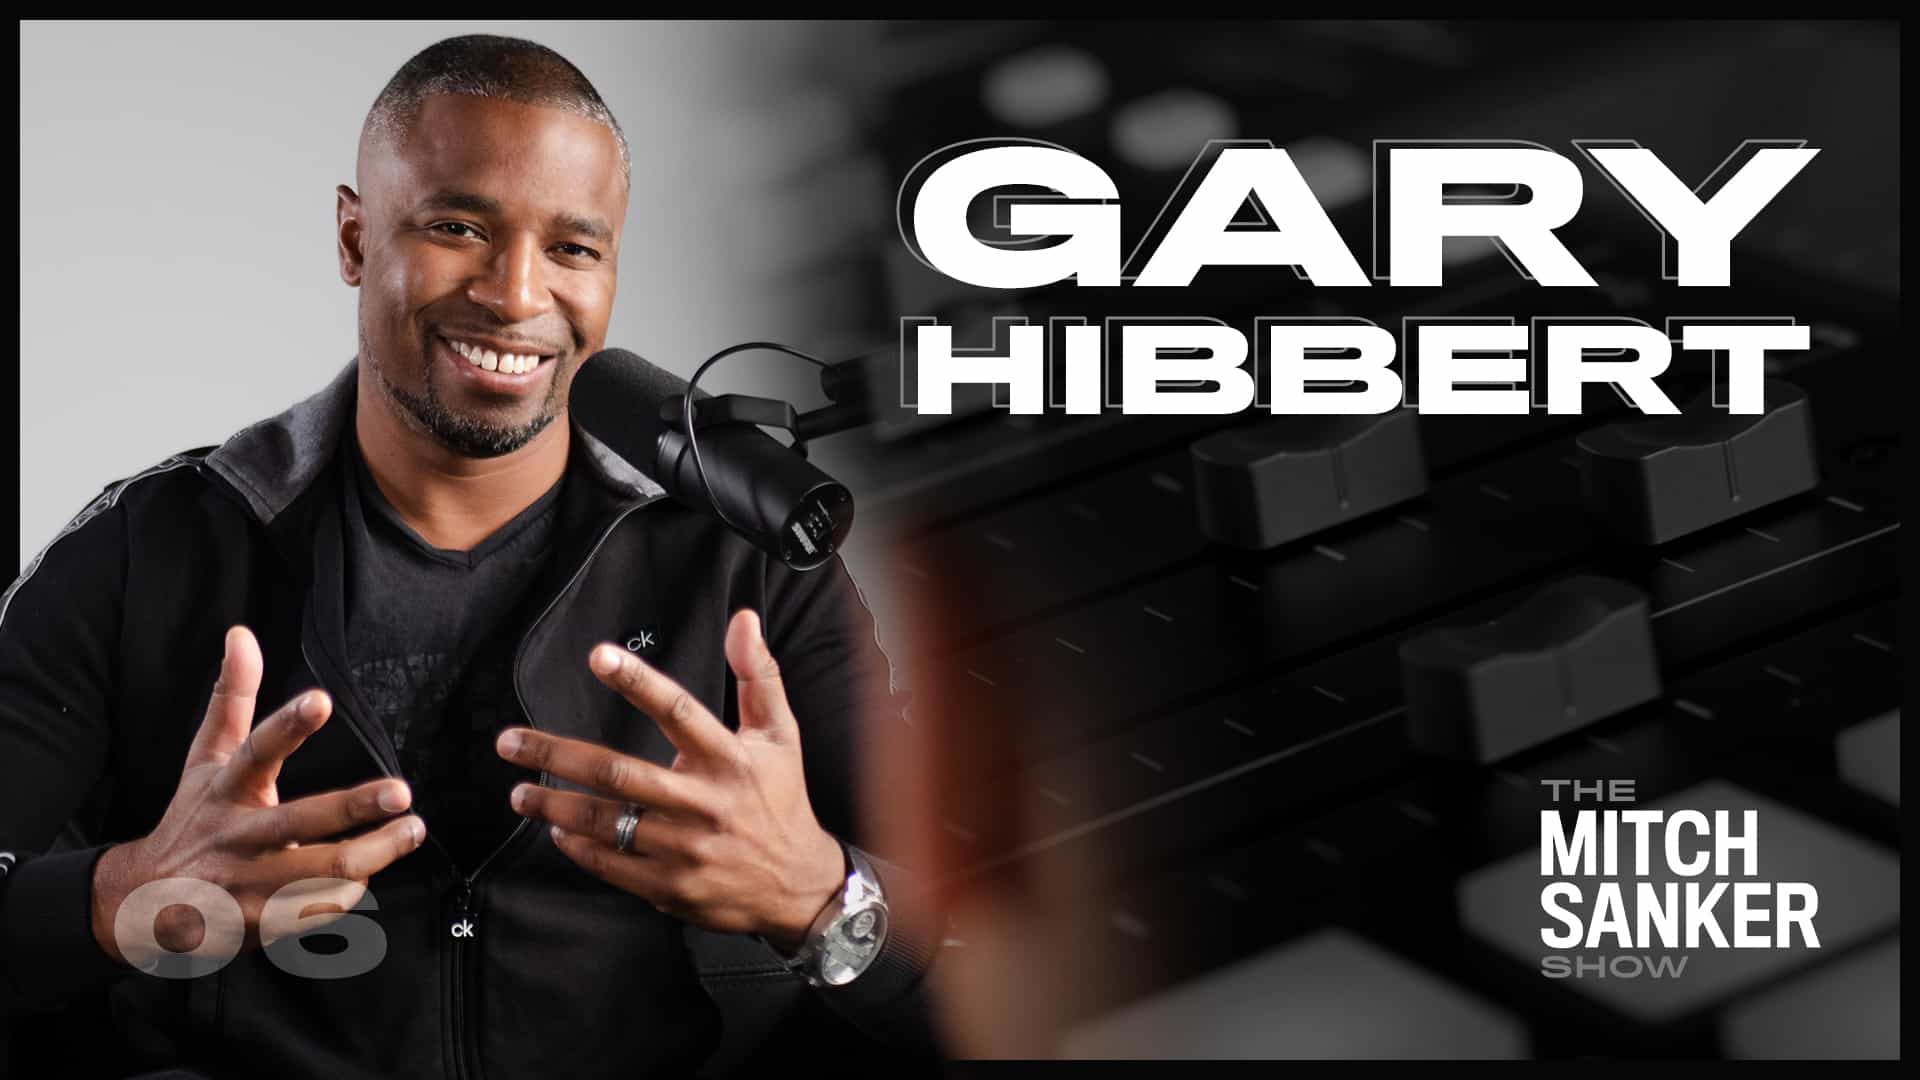 You are currently viewing The Mitch Sanker Show – Episode 06 featuring Gary Hibbert